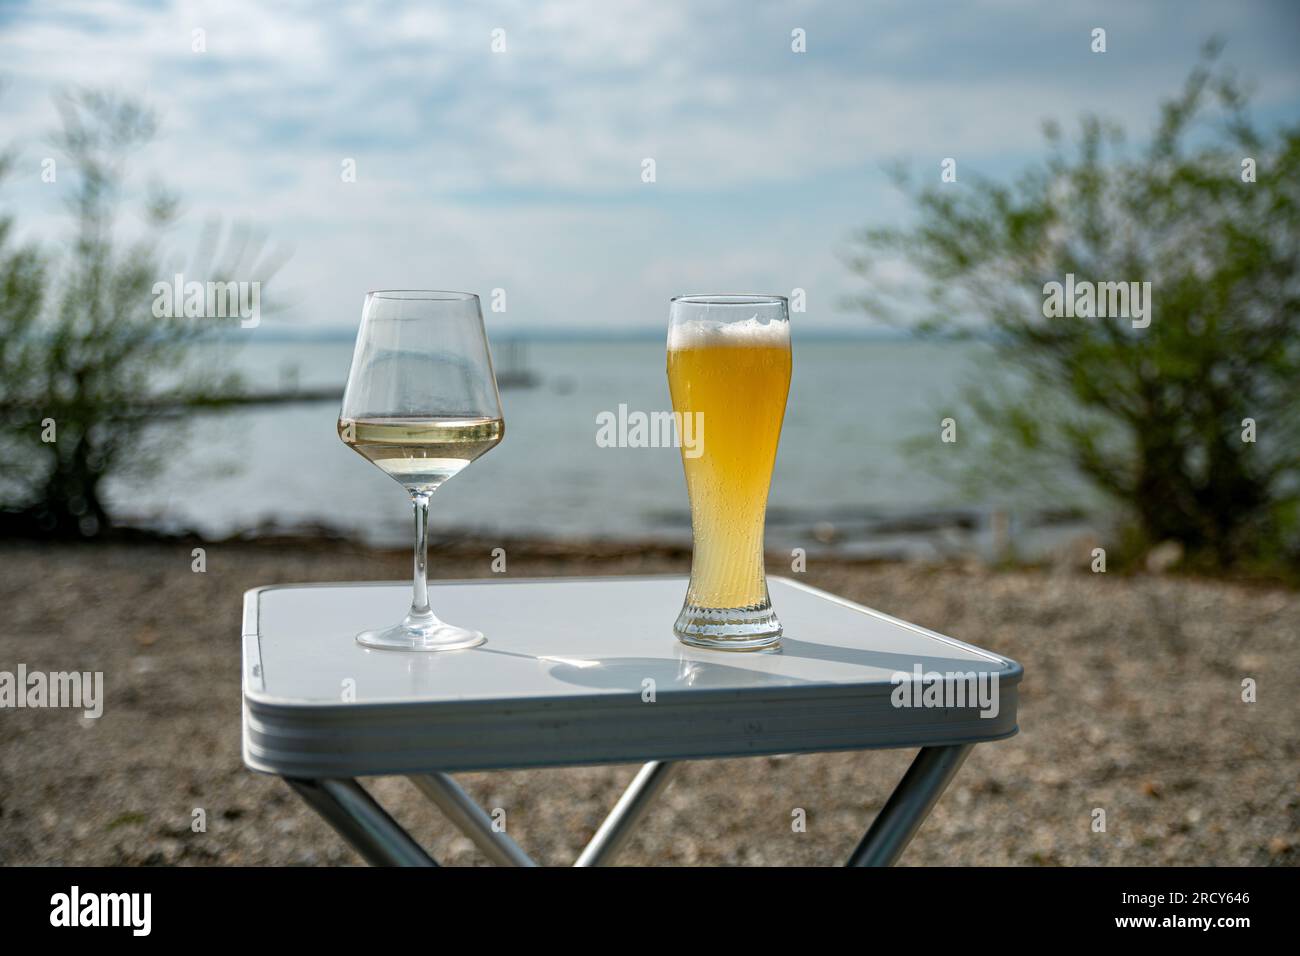 camping table with drinks such as a glass of wine and a glass of beer Stock Photo